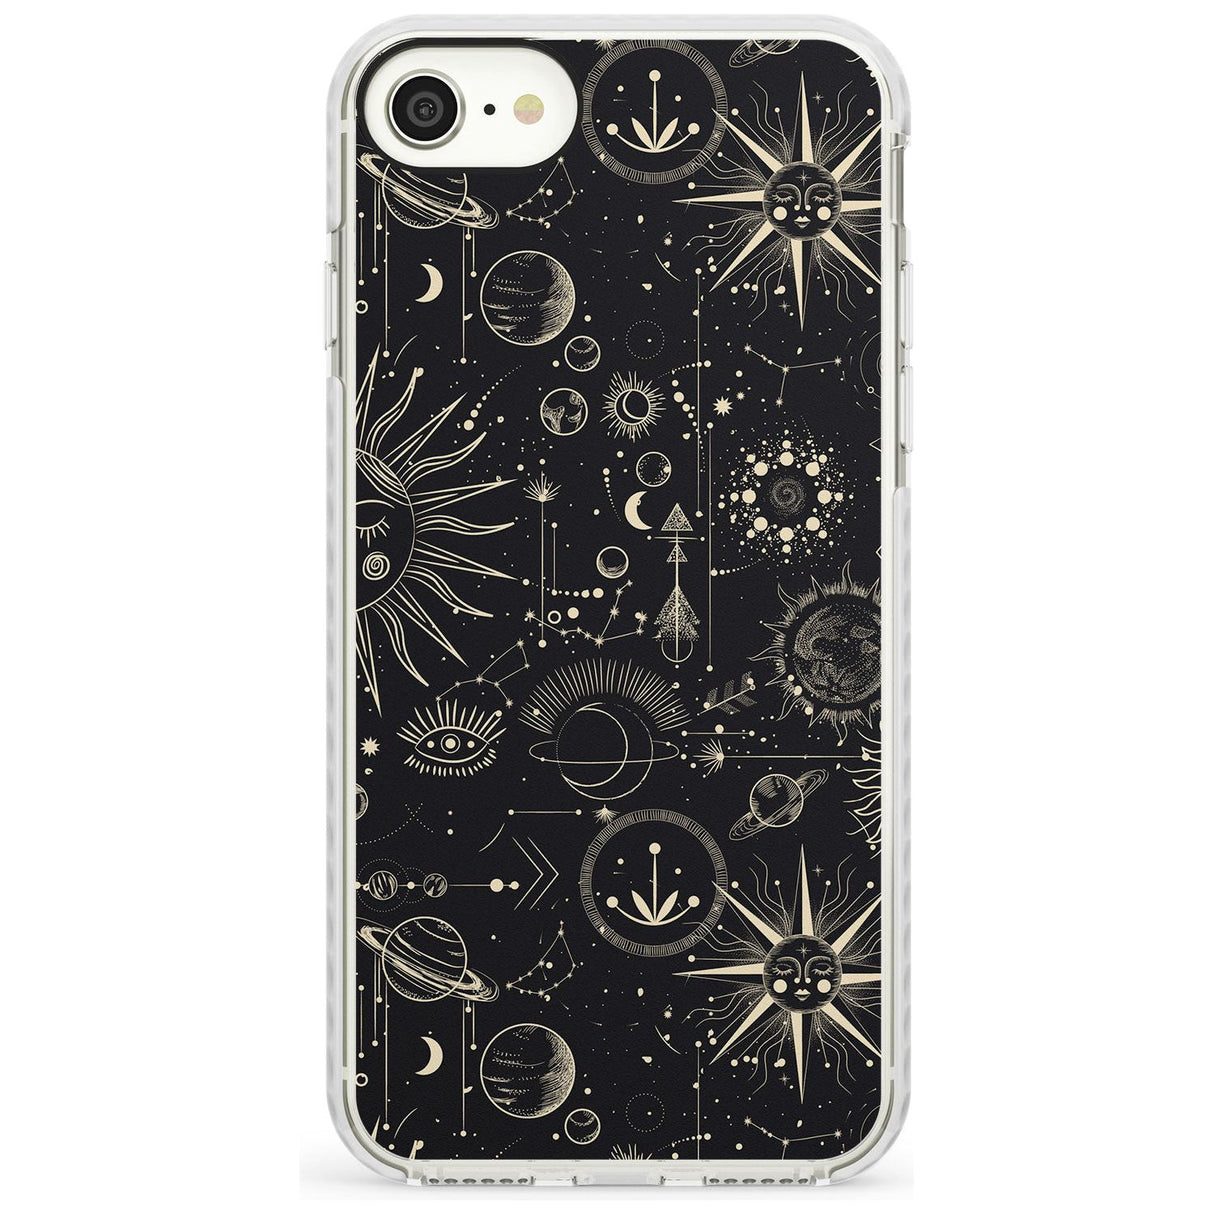 Suns & Planets Slim TPU Phone Case for iPhone SE 8 7 Plus